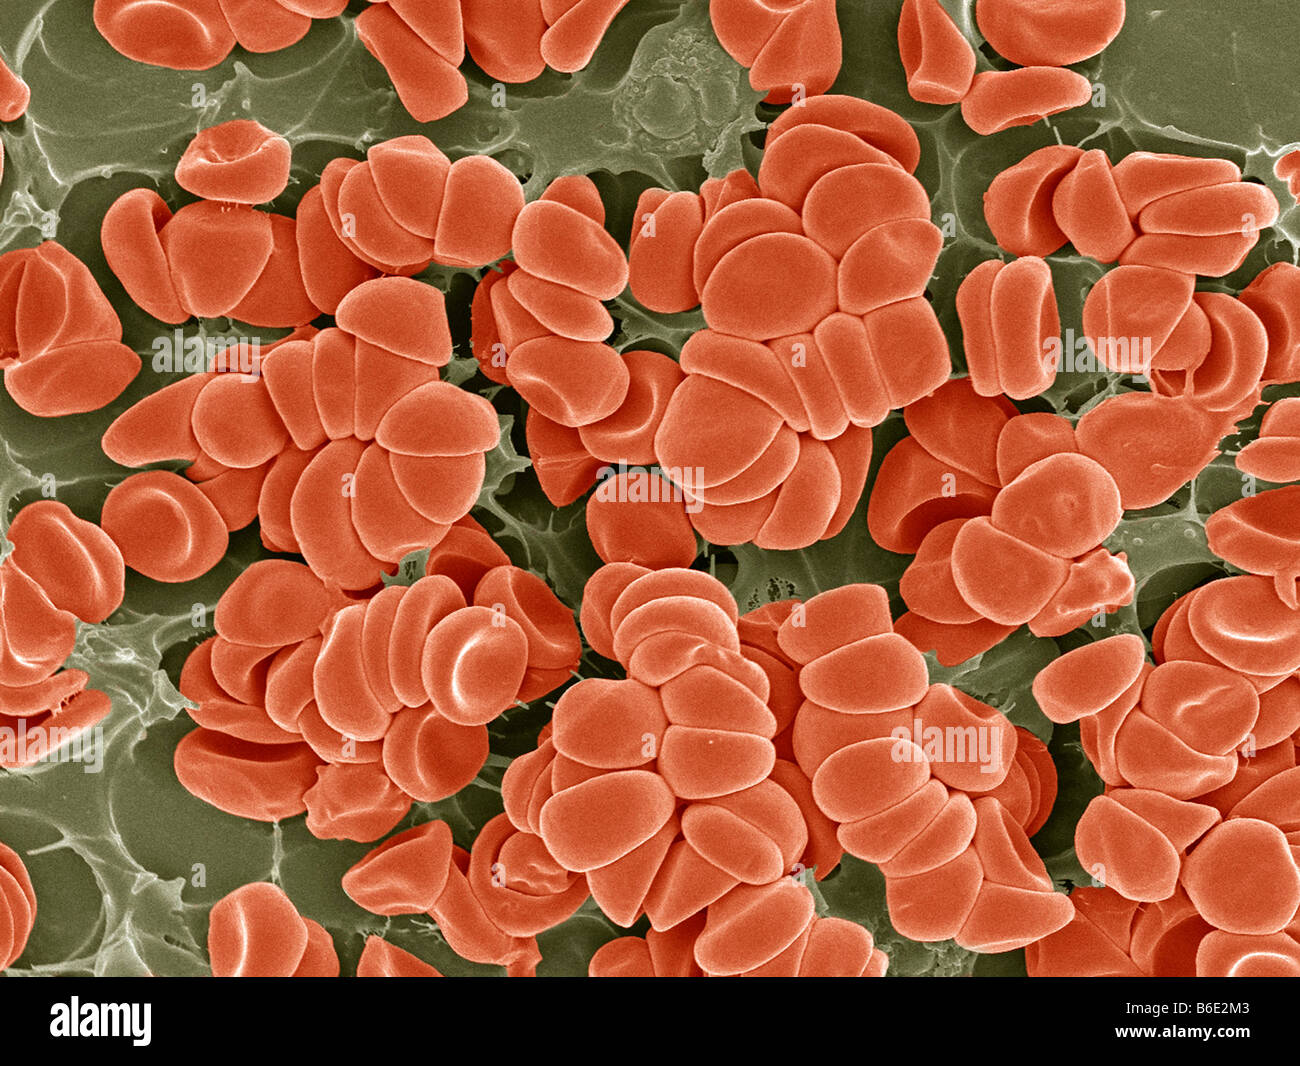 Blood clot. Coloured scanning electron micrograph (SEM) of red blood ...